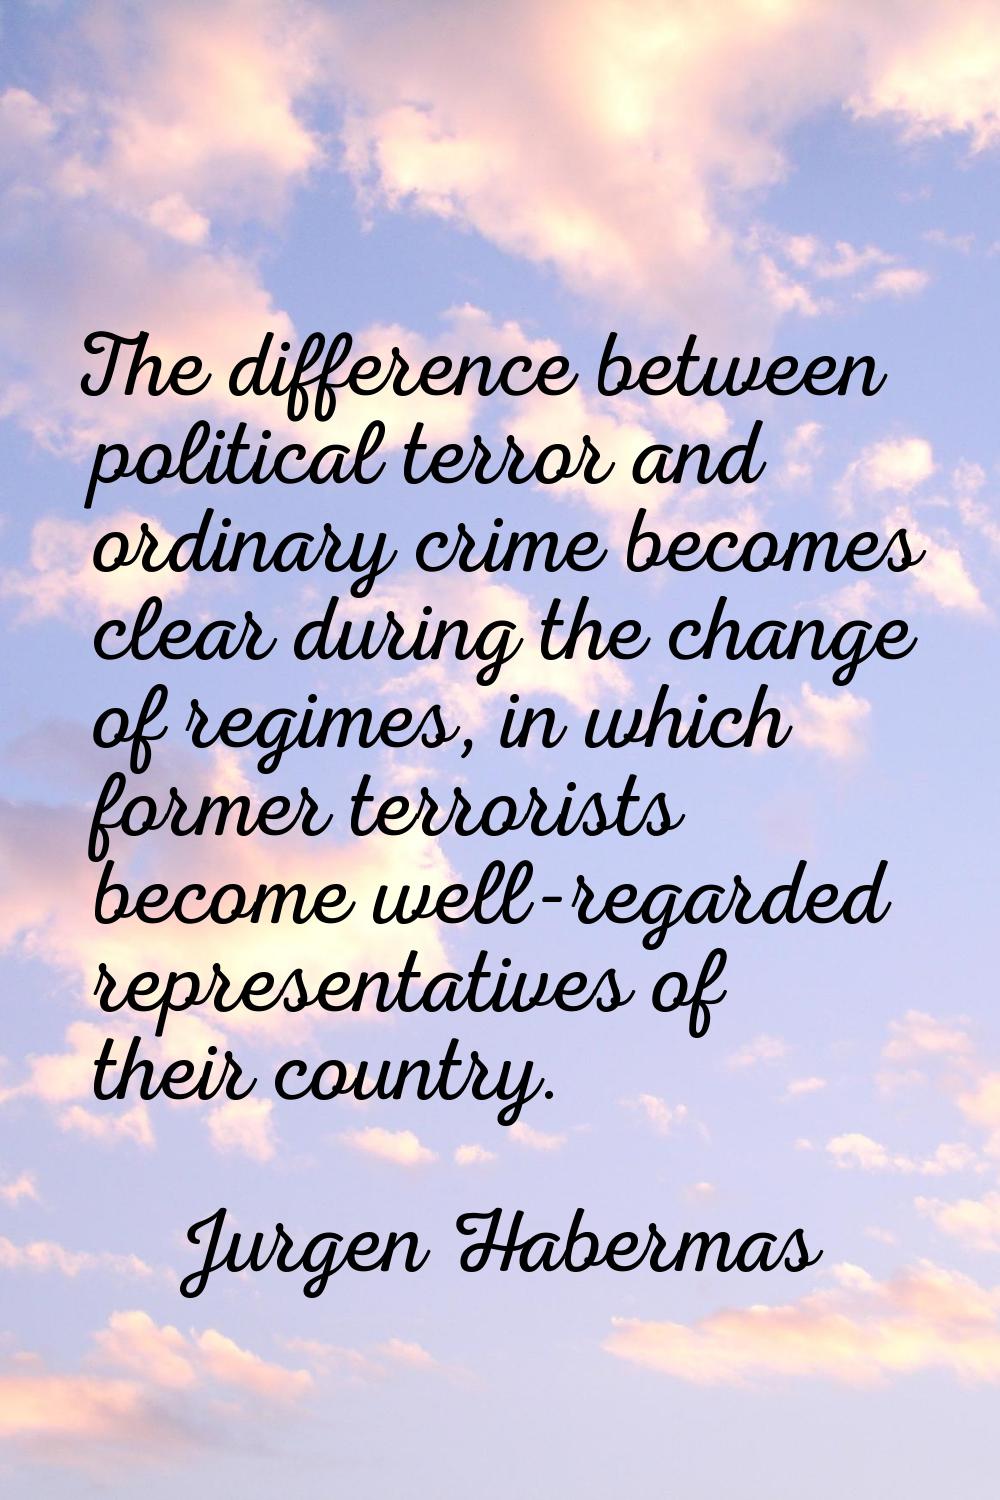 The difference between political terror and ordinary crime becomes clear during the change of regim